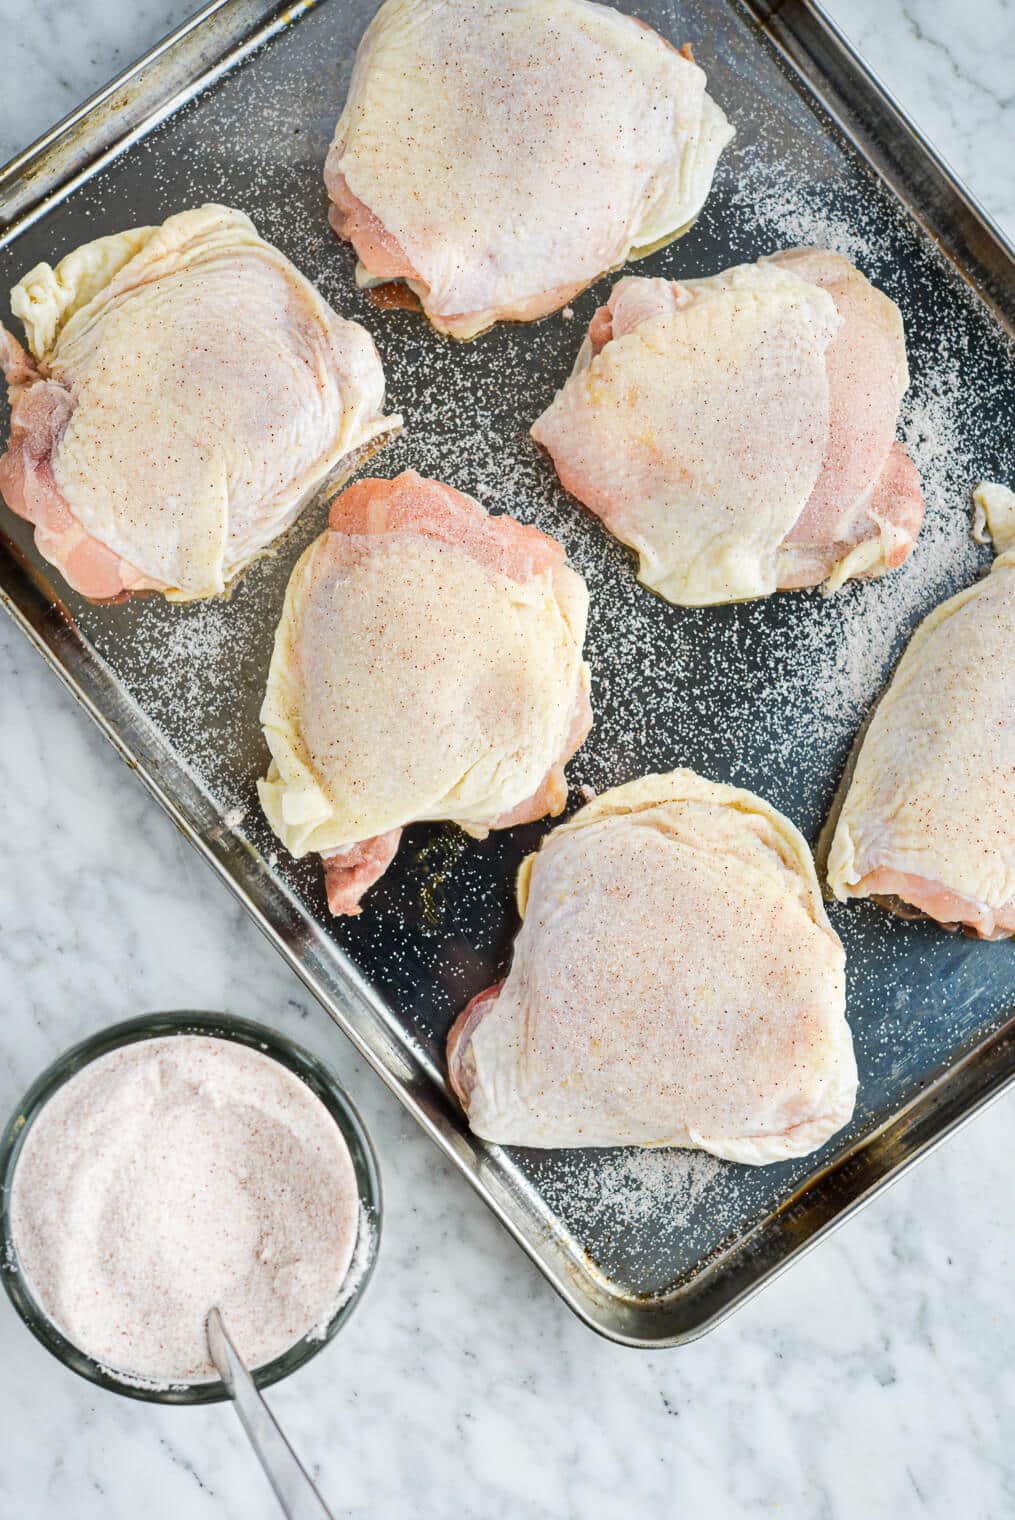 bone-in, skin-on chicken thighs that have been dry brined with sea salt laying on a stainless steel rimmed baking sheet